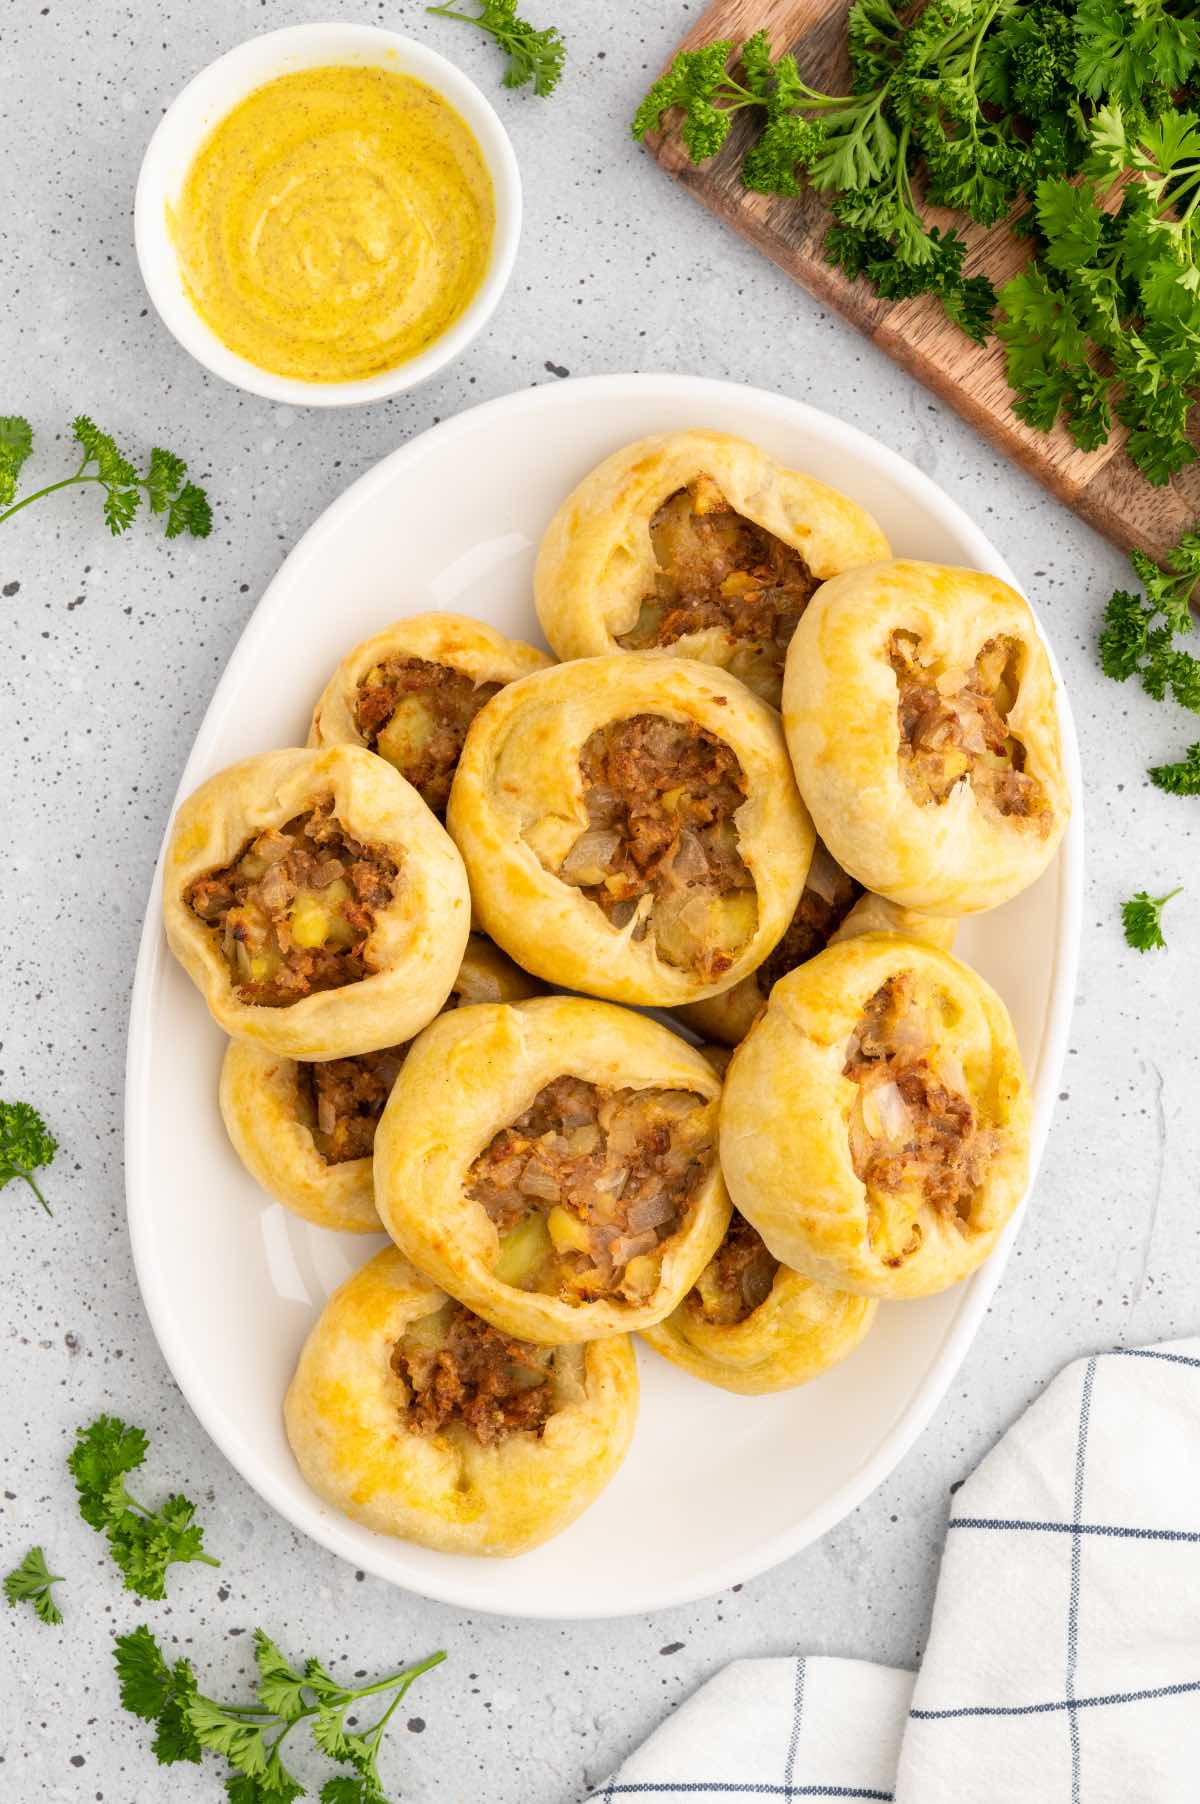 A white serving platter piled with vegan potato knish pastries garnished with parsley and served with a side of mustard.